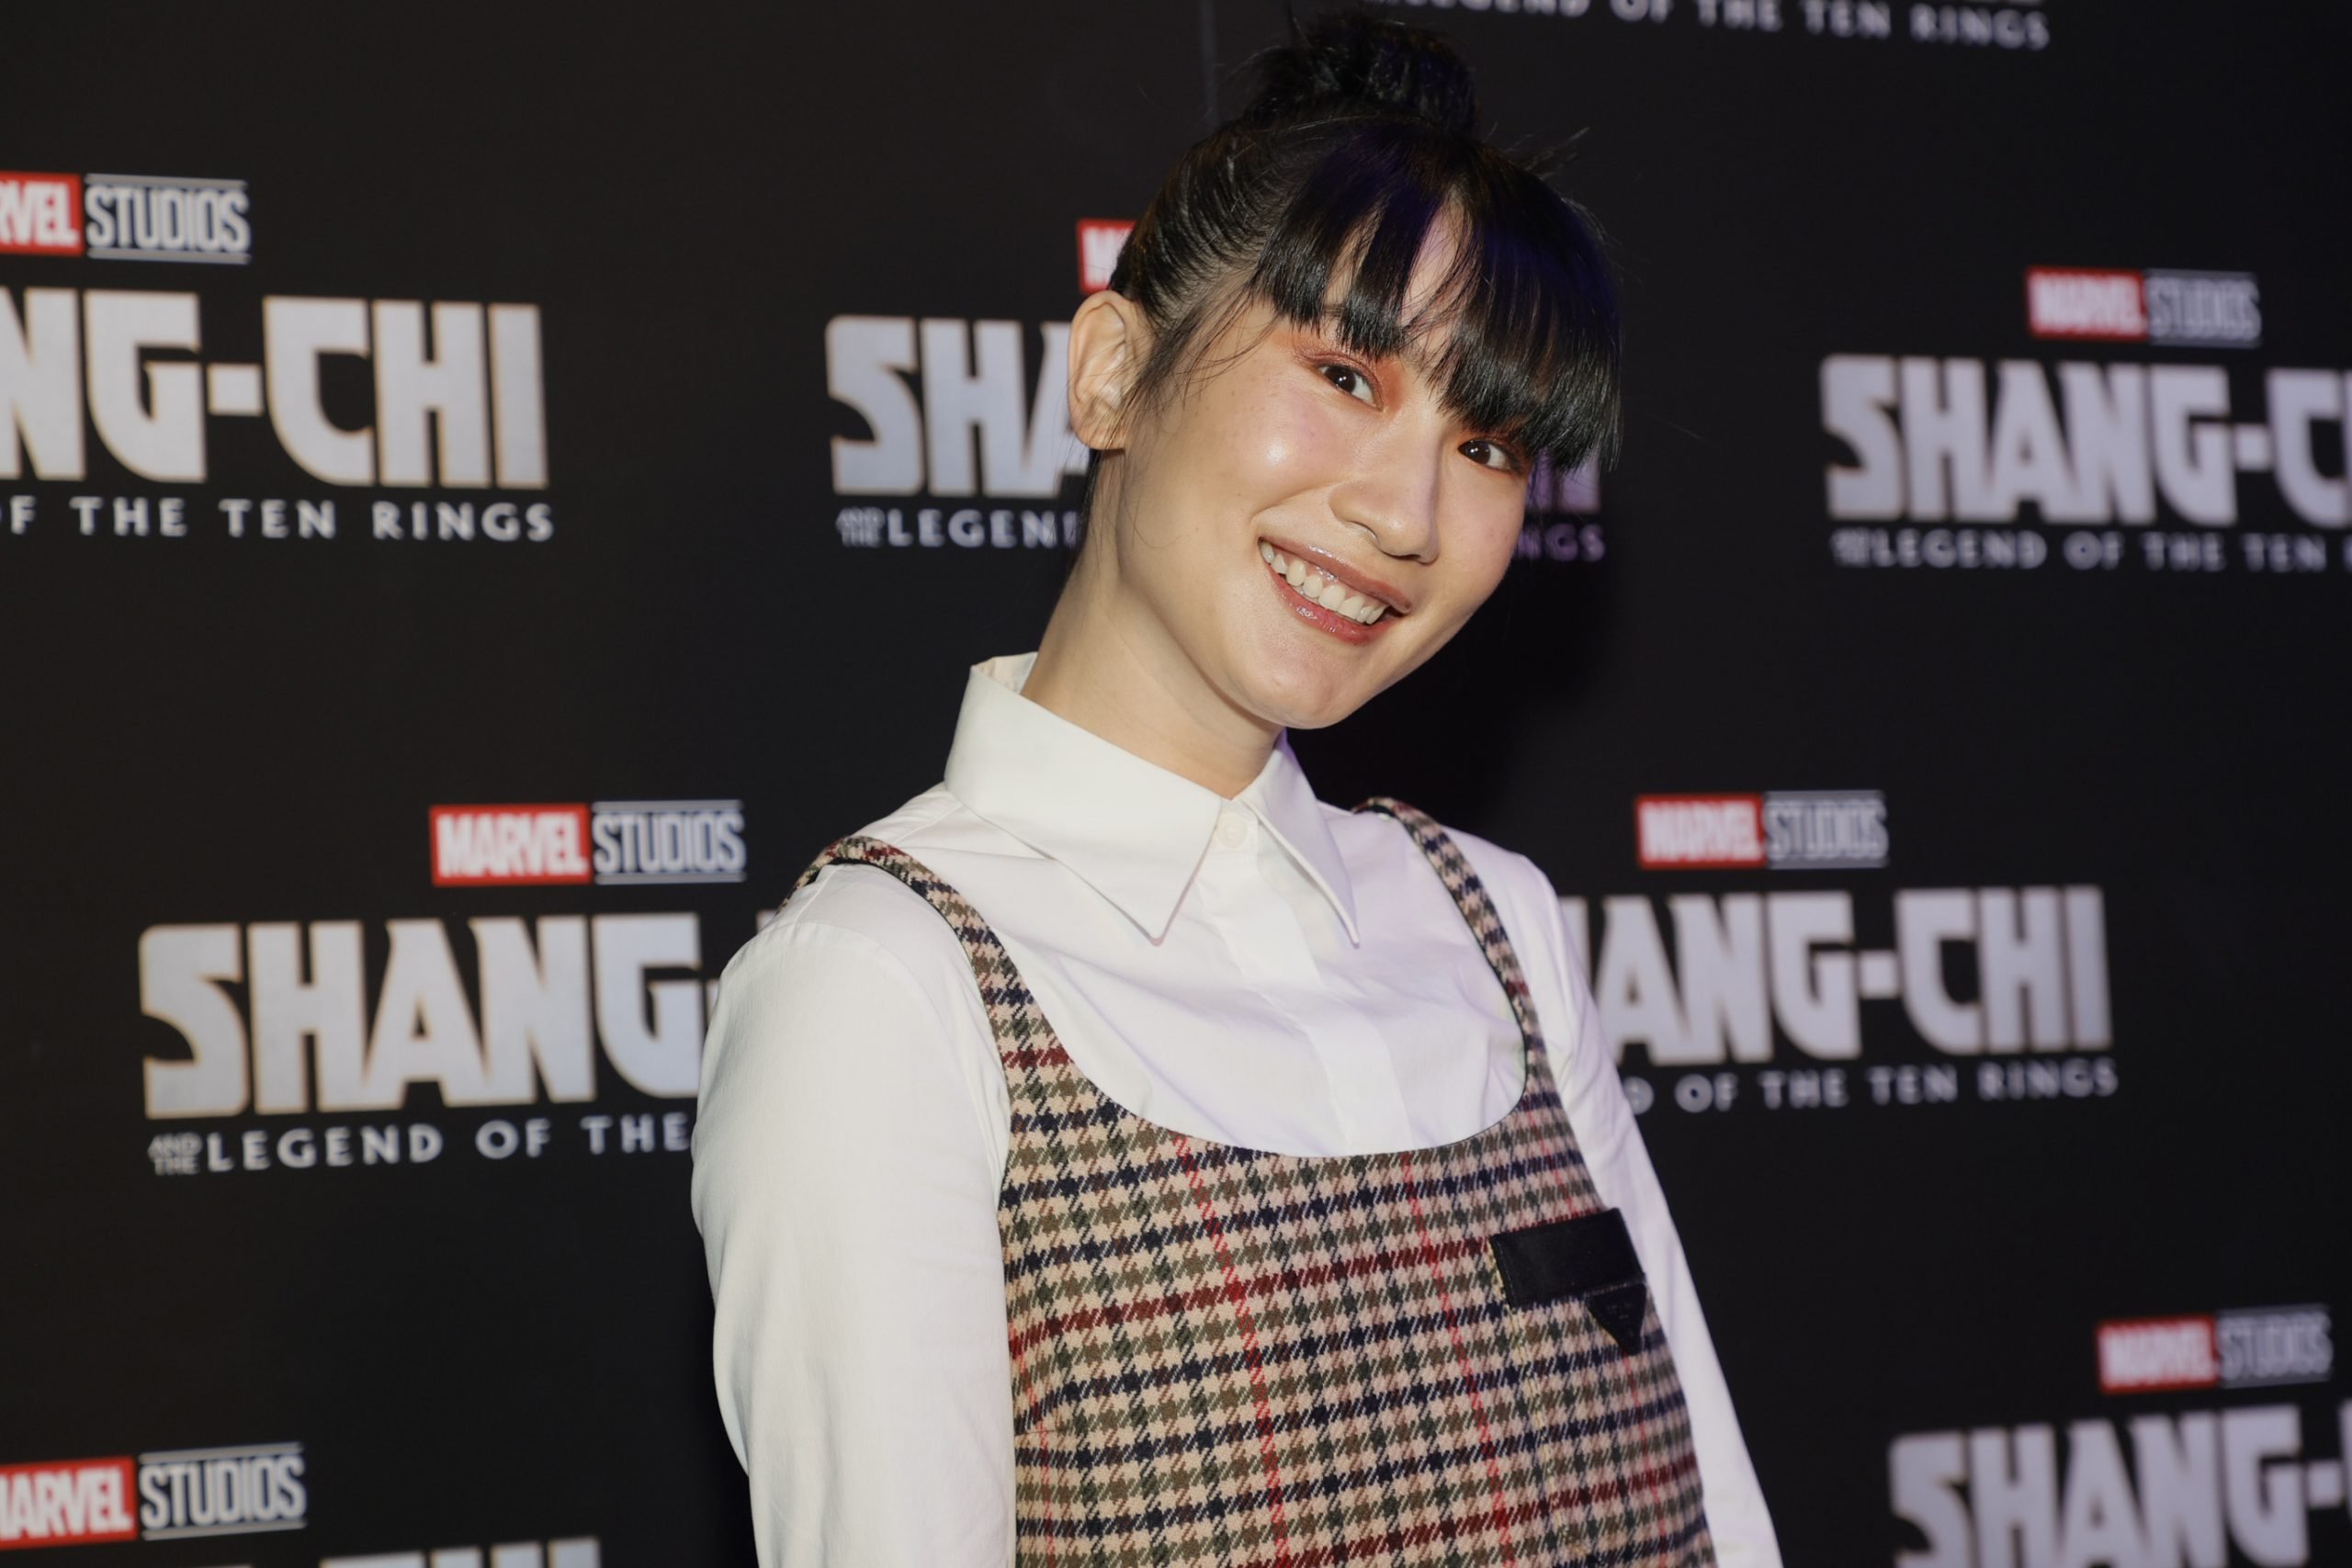 Meng'er Zhang, in a white shirt and checkered dress, smiling at the camera at a screening for her movie 'Shang-Chi and the Legend of the Ten Rings.'